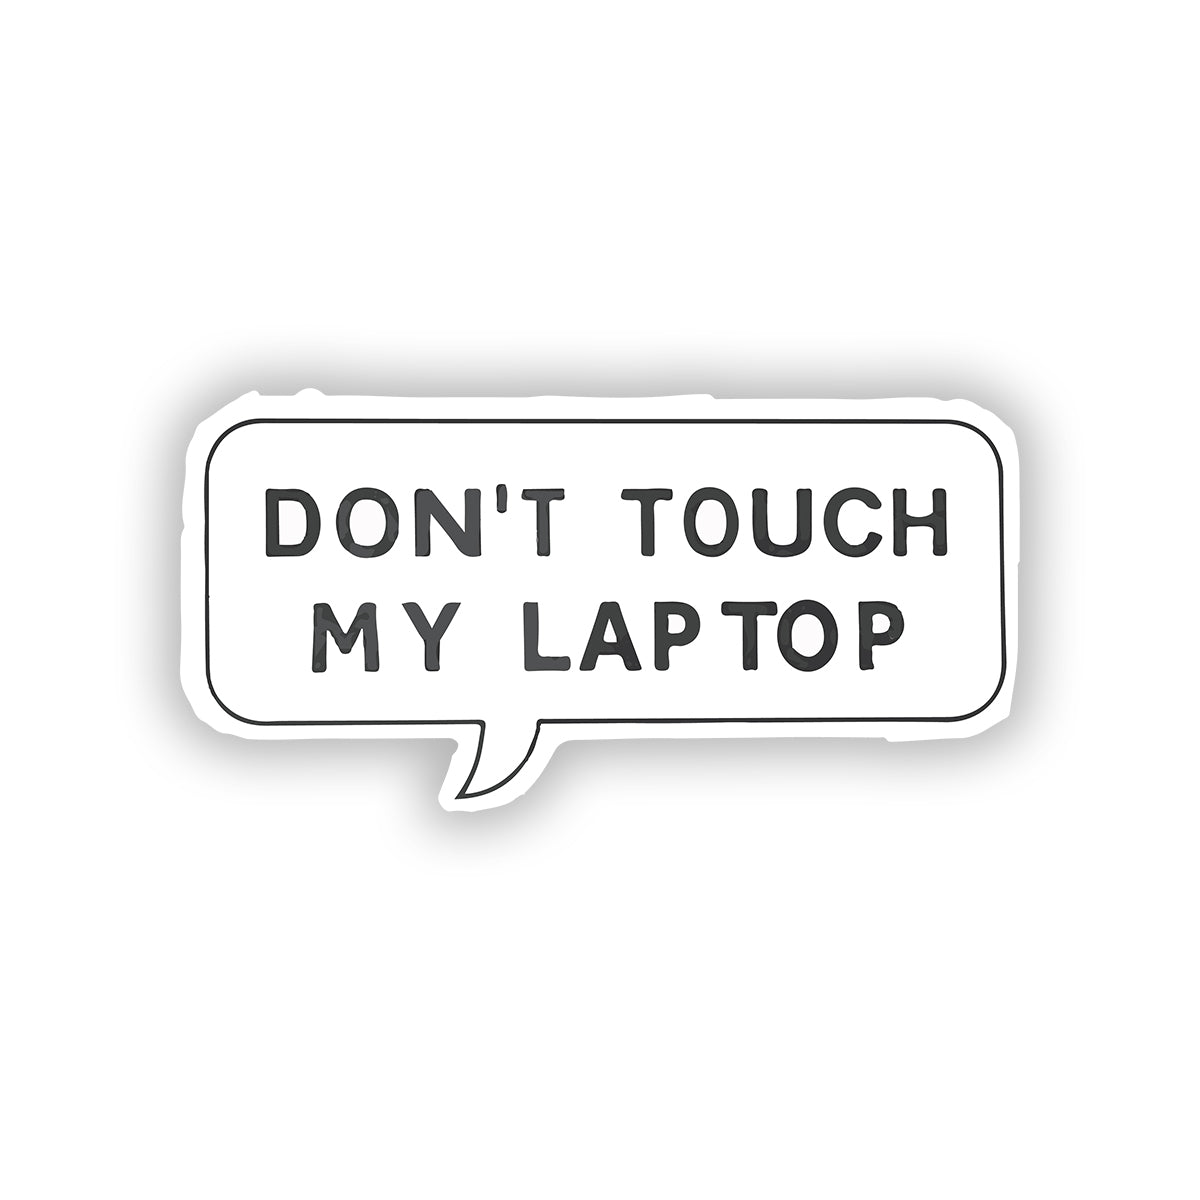 Don't Touch my laptop